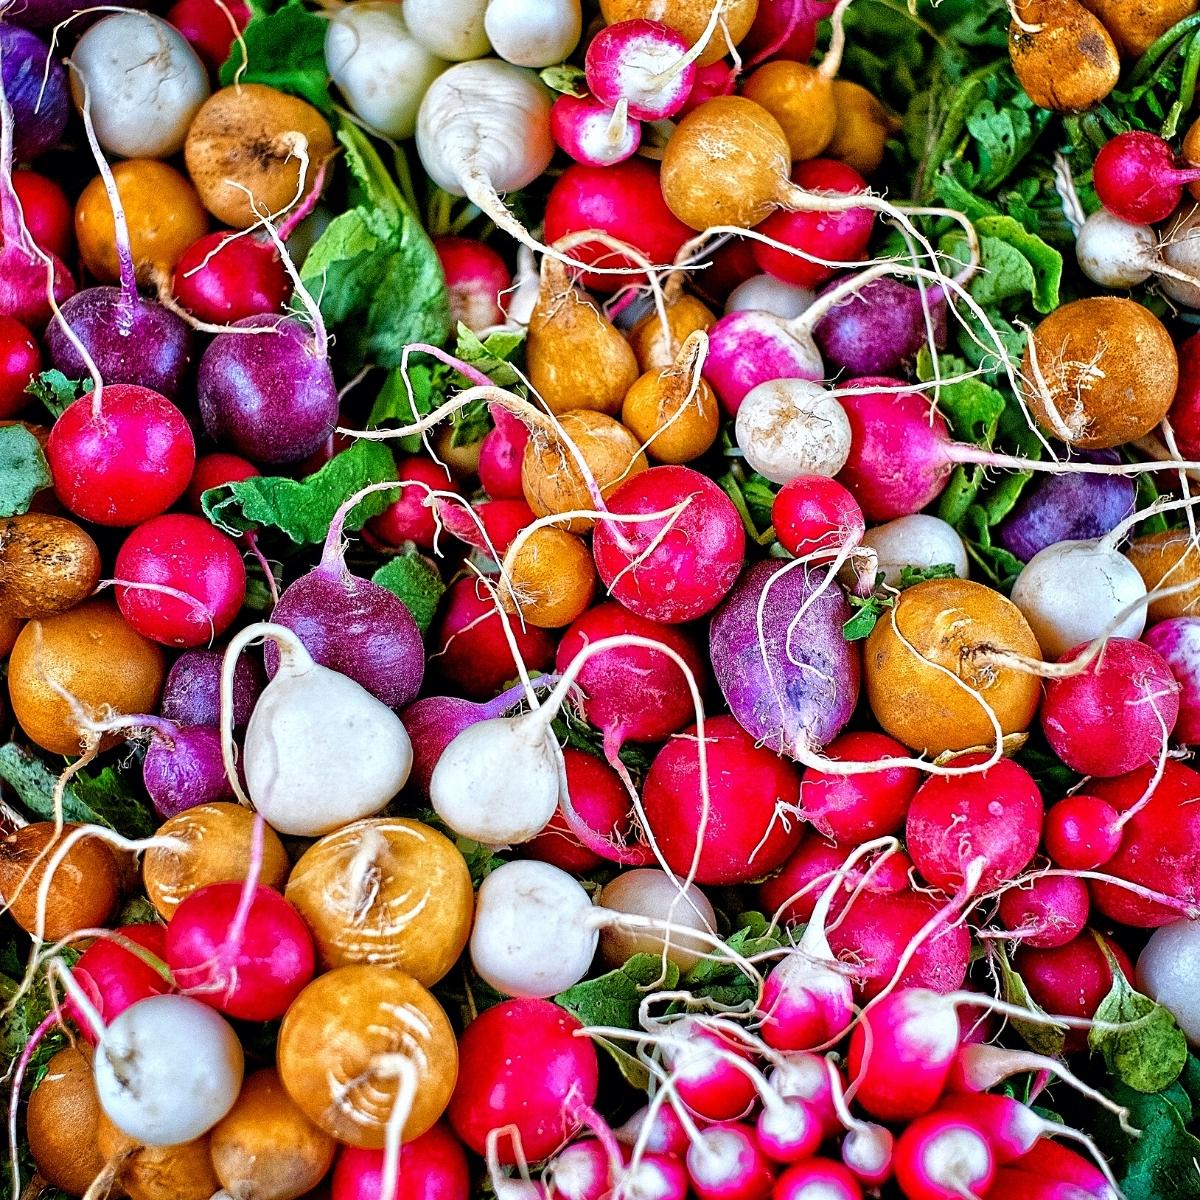 A bunch of multi colored radishes and turnips in a pile.